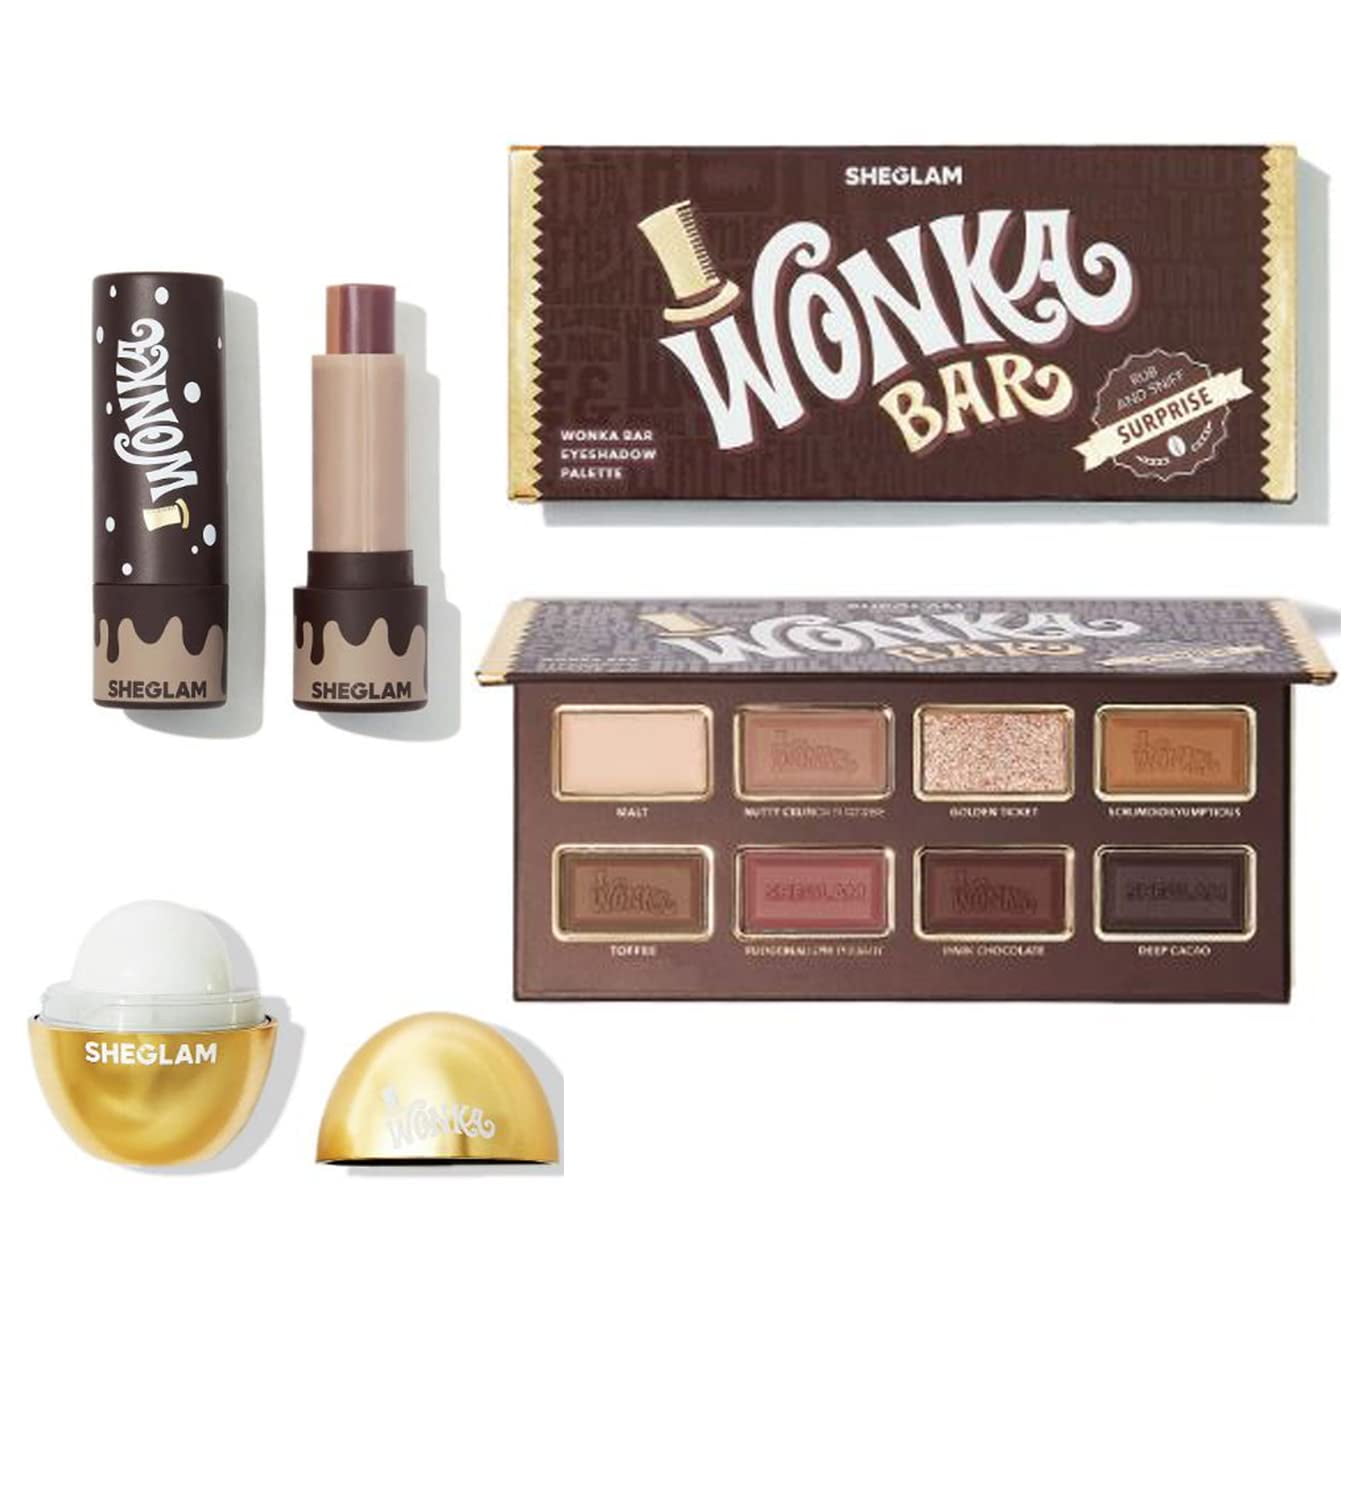 Chocolate 3pcs Makeup Set! Includes Lip Balm, Eyeshadow Palette And Perfume! Chocolate Inspired Makeups! Makeup Gift For Friends and Movie Fans! - Walmart.com